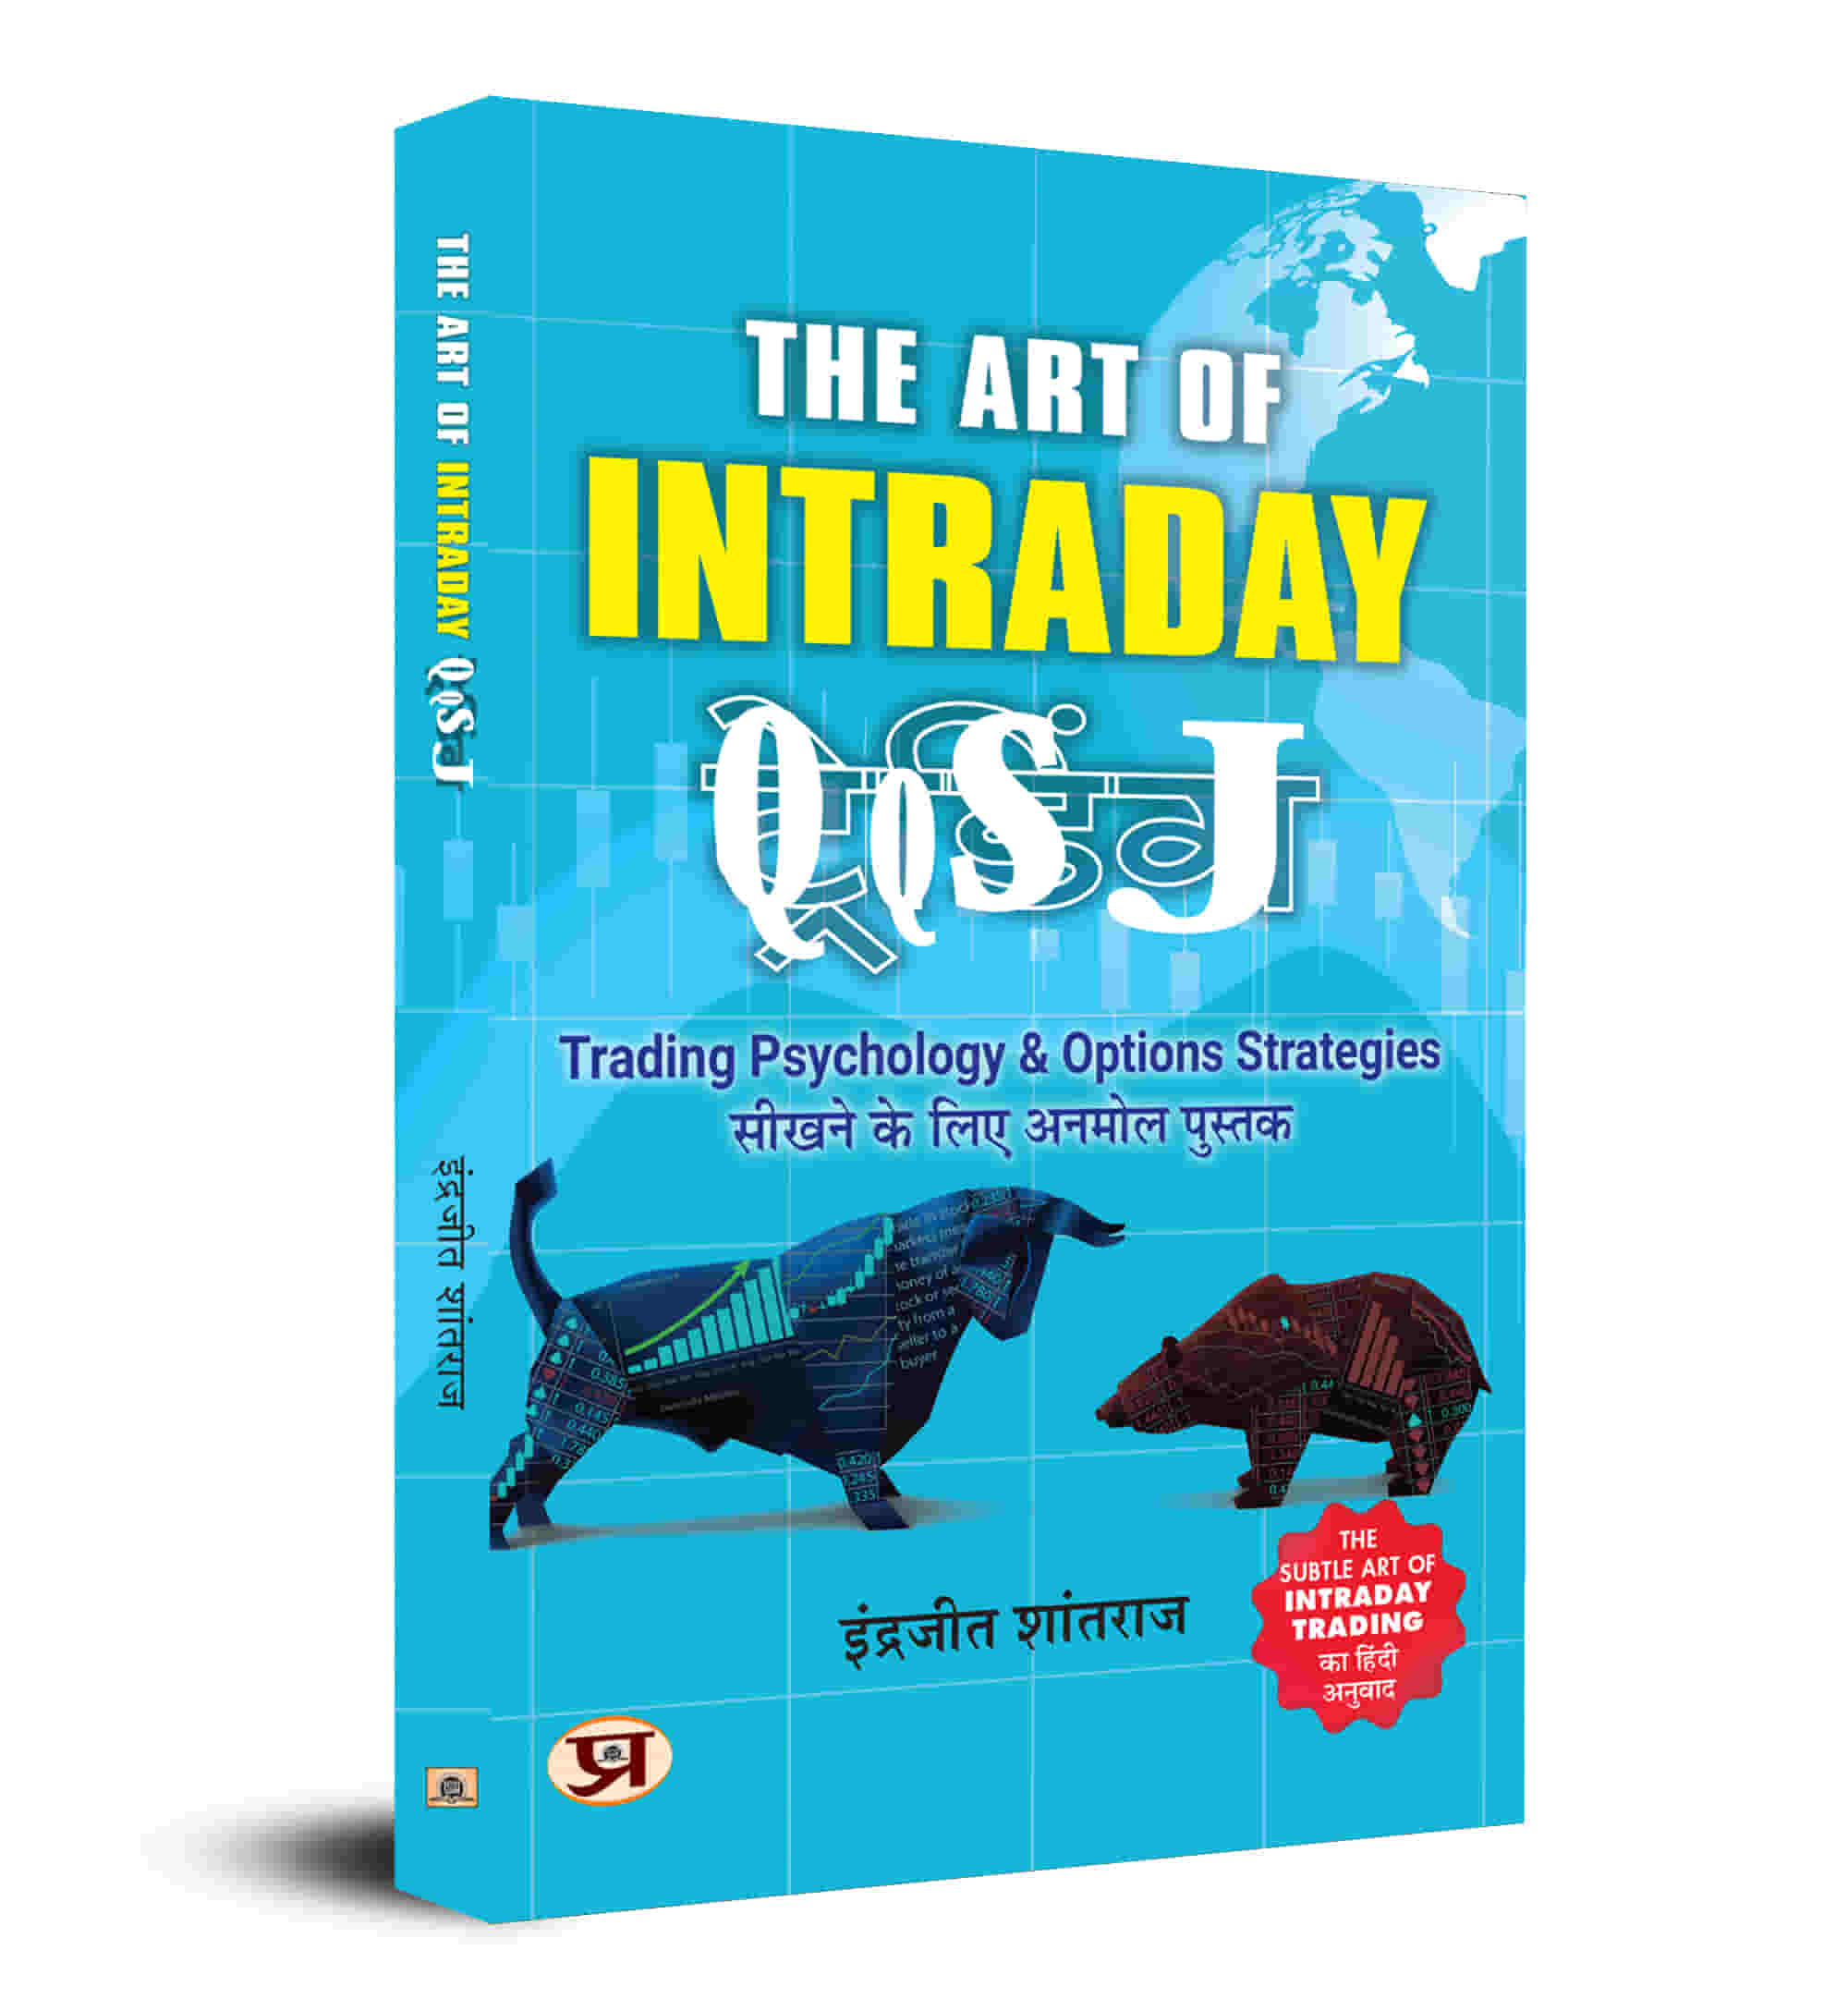 The Art of Intraday Trading 